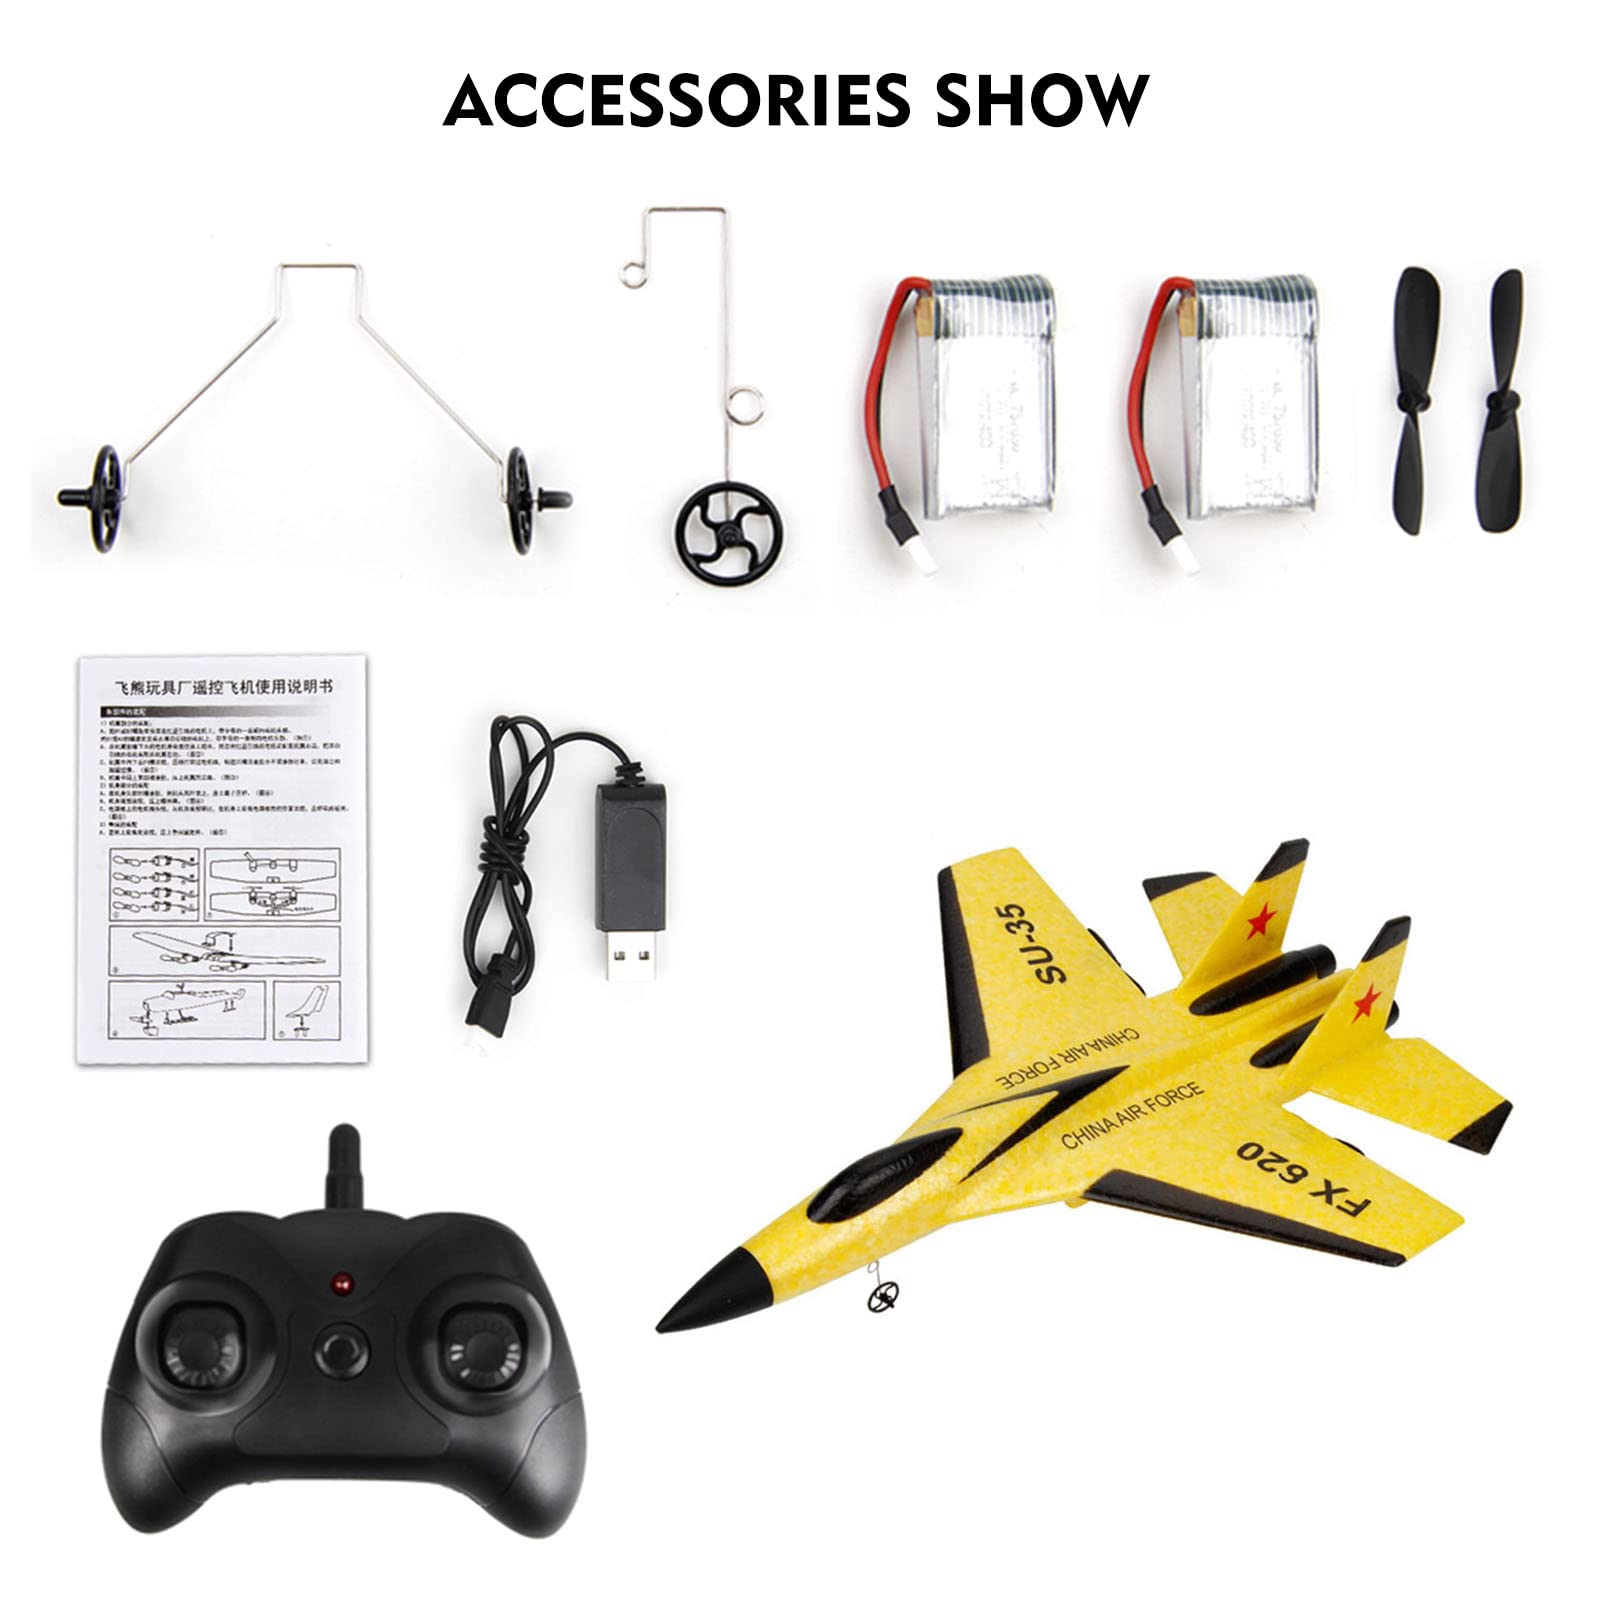 GoolRC FX620 RC Airplane, 2.4GHz Remote Control Airplane, 2 Channel RC Plane, SU-35 RC Glider EPP Aircraft Model with 3-Axis Gyro, Outdoor Flight Toys for Kids and Adults with 2 Battery (Yellow)